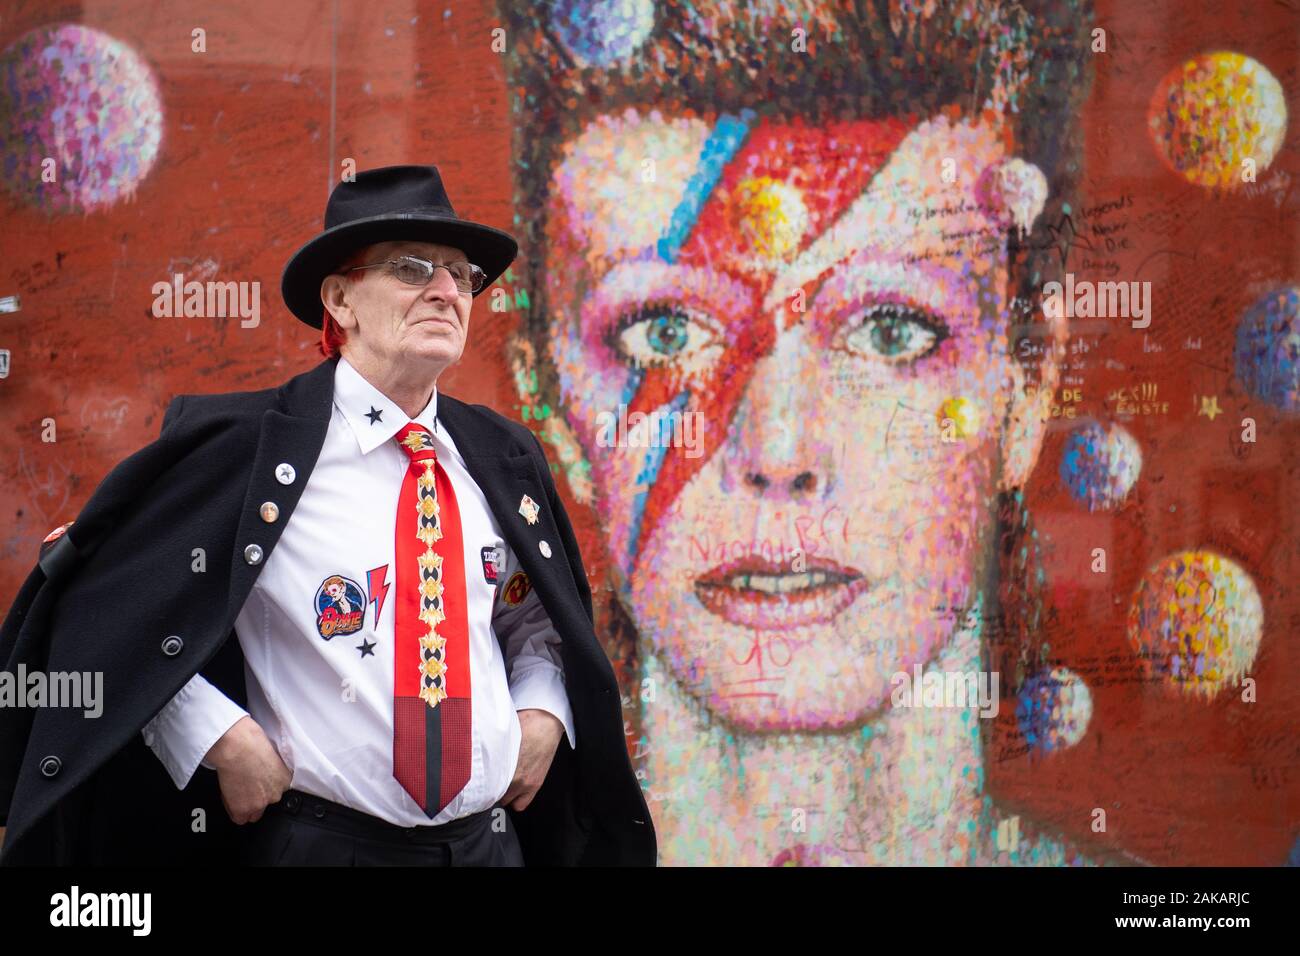 David Bowie fan Clive Daly at the David Bowie mural in Brixton, south London, on what would have been the singer's 73rd birthday. Stock Photo